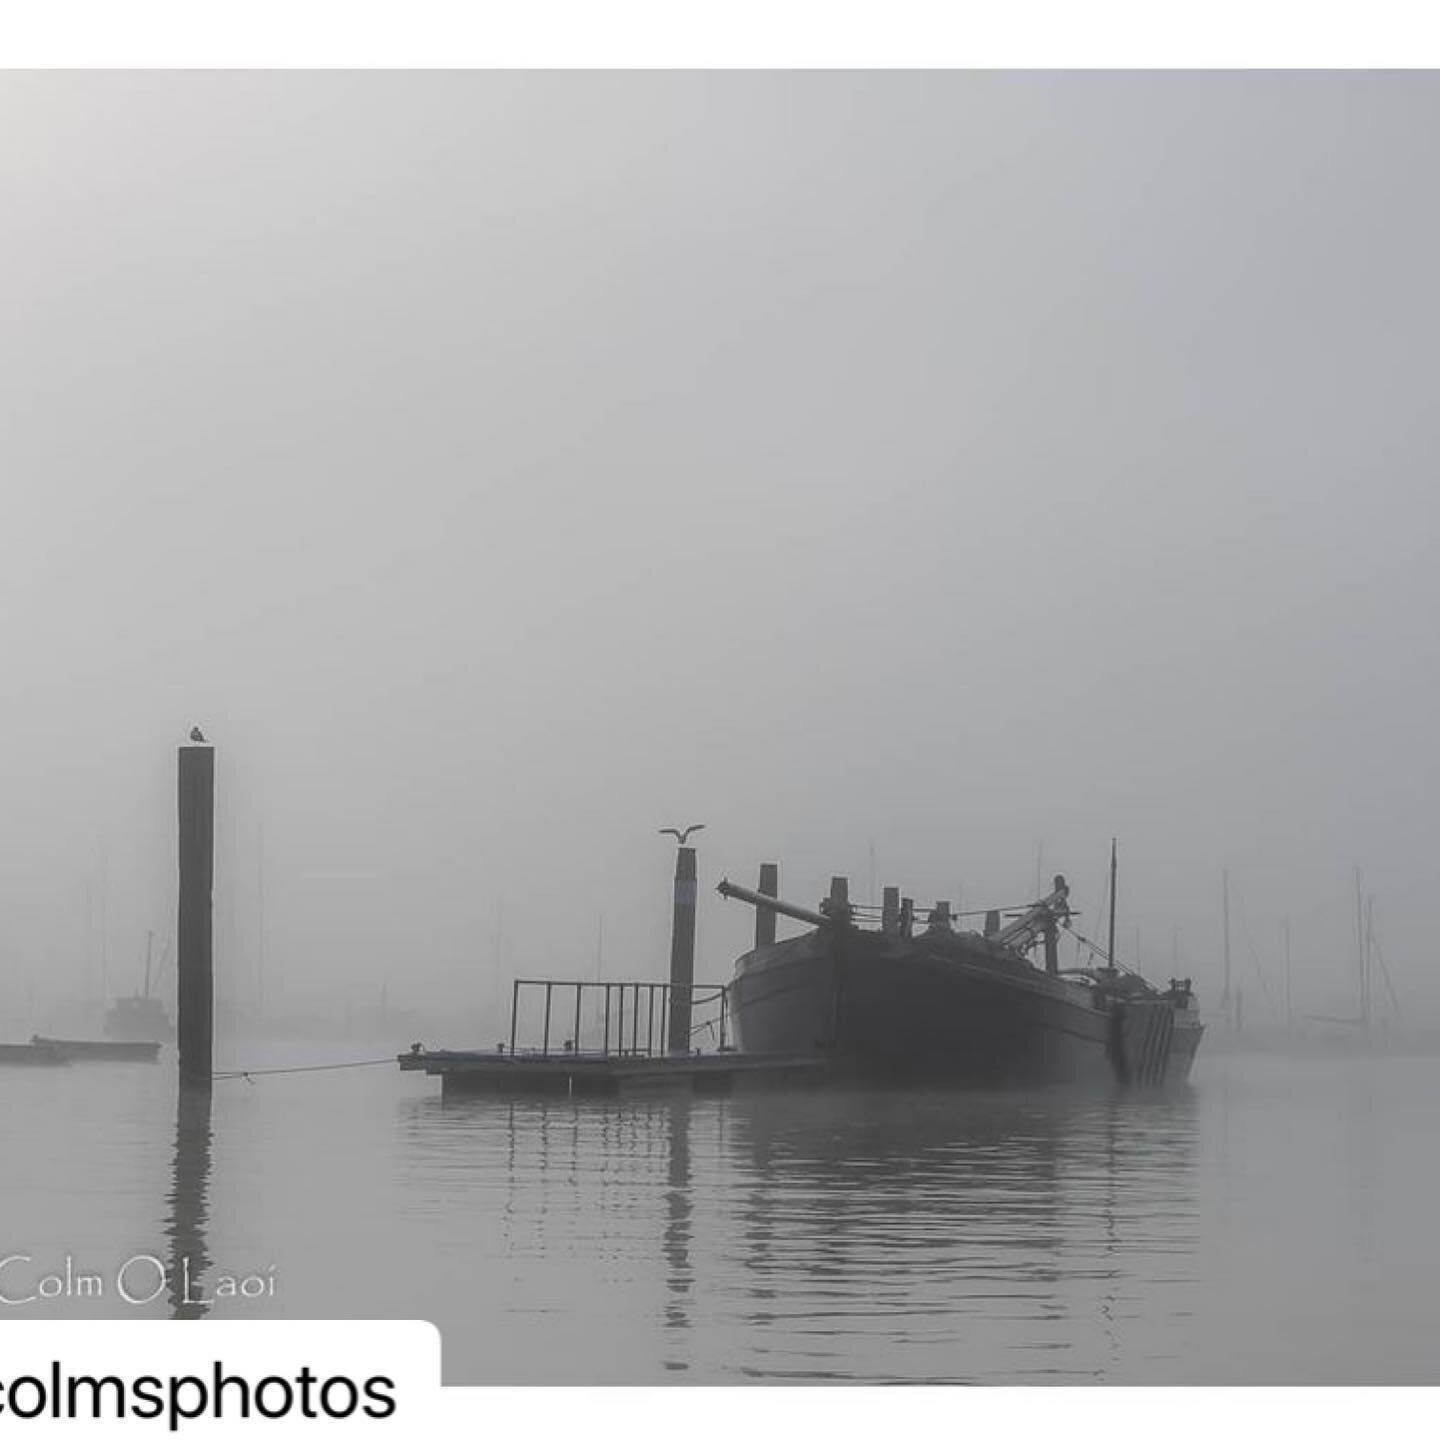 #Repost @colmsphotos with @make_repost
・・・
Dawn in the mist
#Dawn #mist #Brightlingsea #Essex #ThamesBarge #sailingbarge #barge